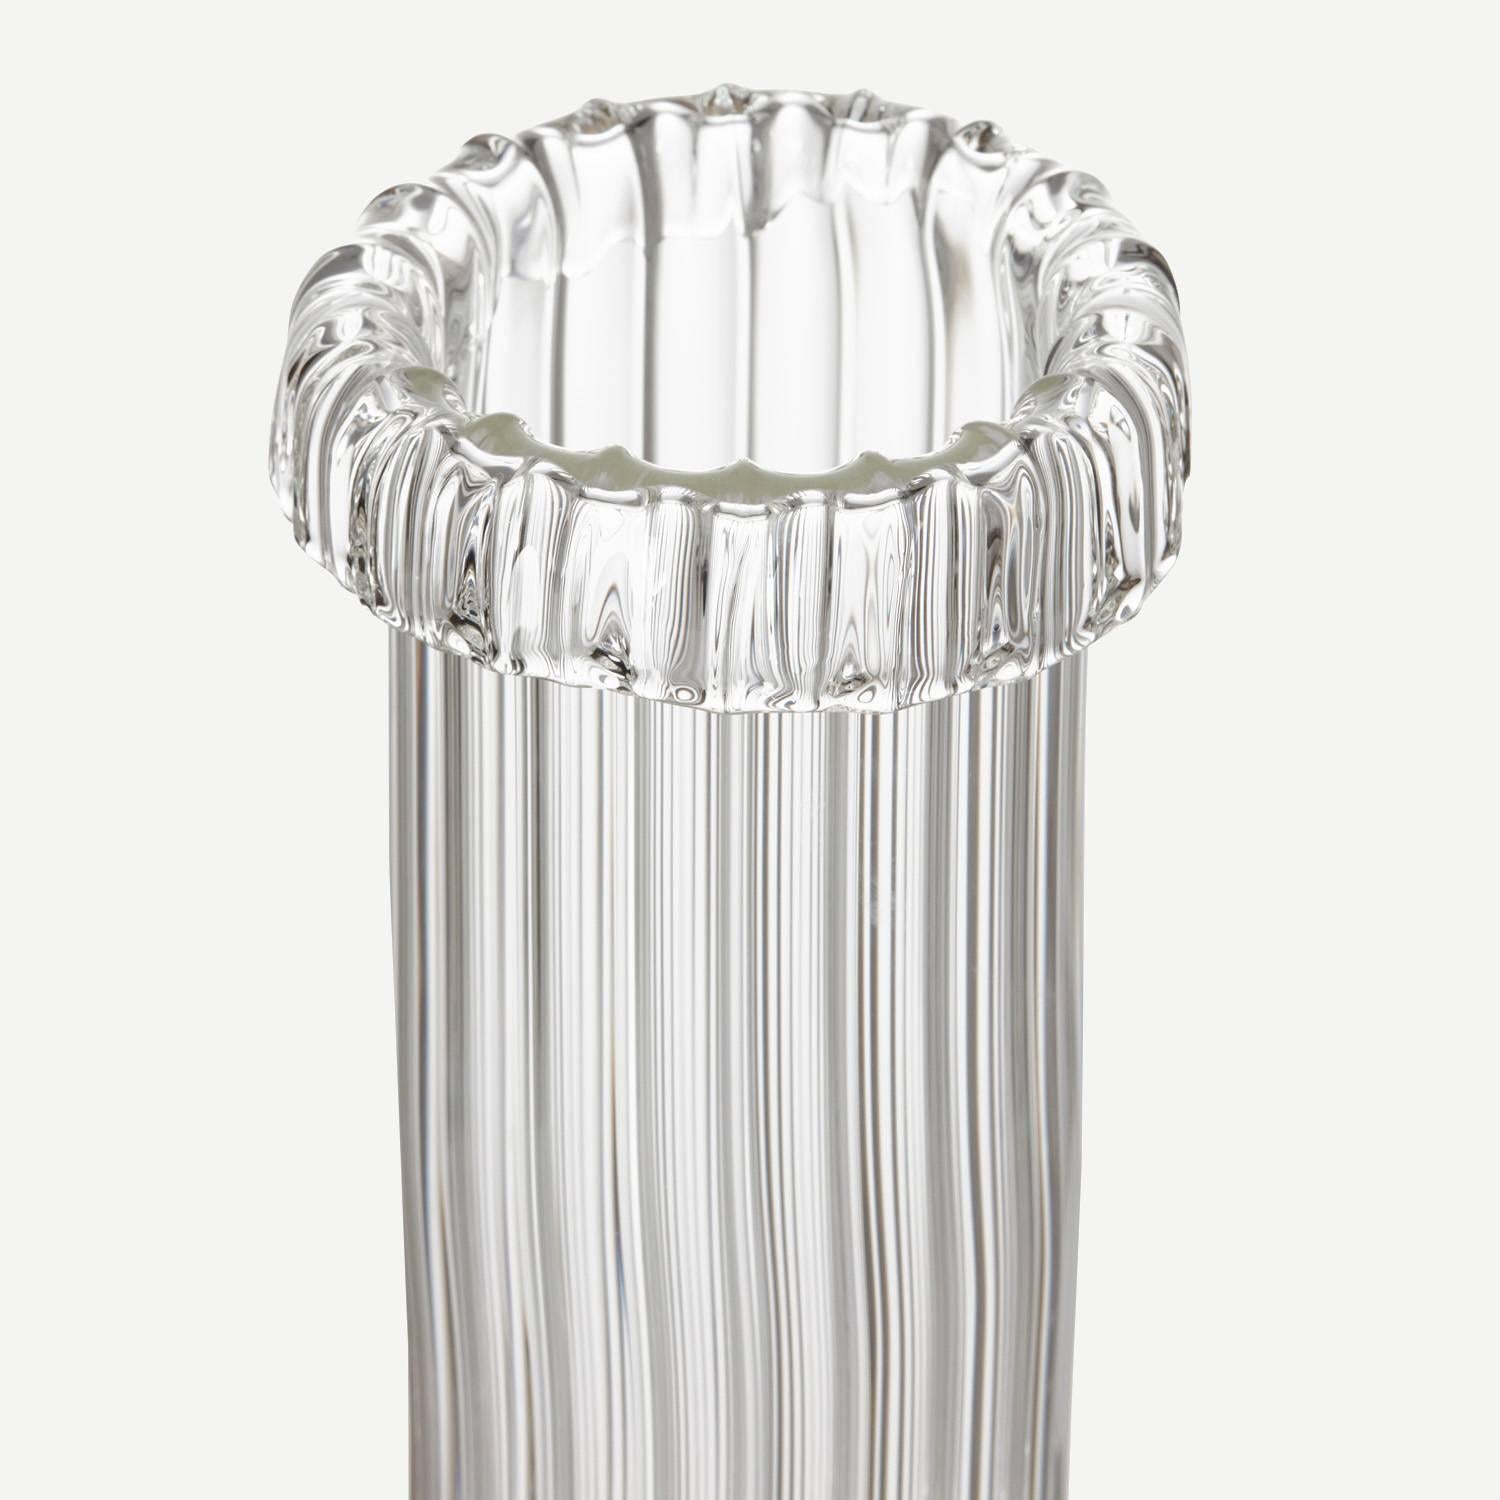 Inspired by the movement of water, this free blown Borosilicate (heat resistant and durable) glass vase has been made with a unique ribbed surface and an organic shape. Jochen made the vase exclusively with the new craftsmen as part of the bathing